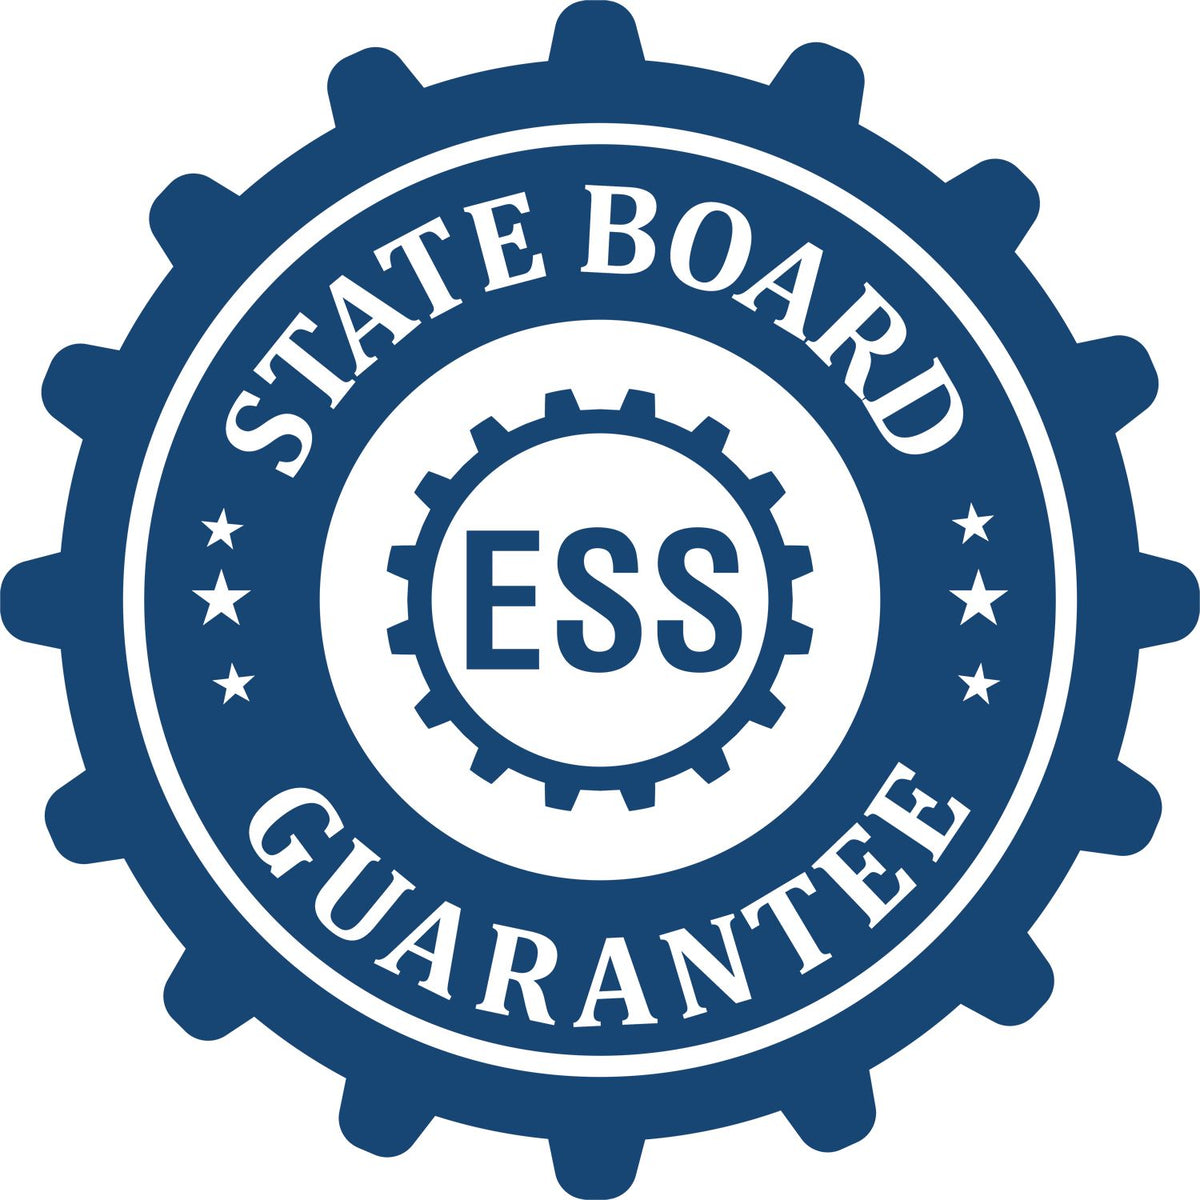 An emblem in a gear shape illustrating a state board guarantee for the Premium MaxLight Pre-Inked Vermont Landscape Architectural Stamp product.